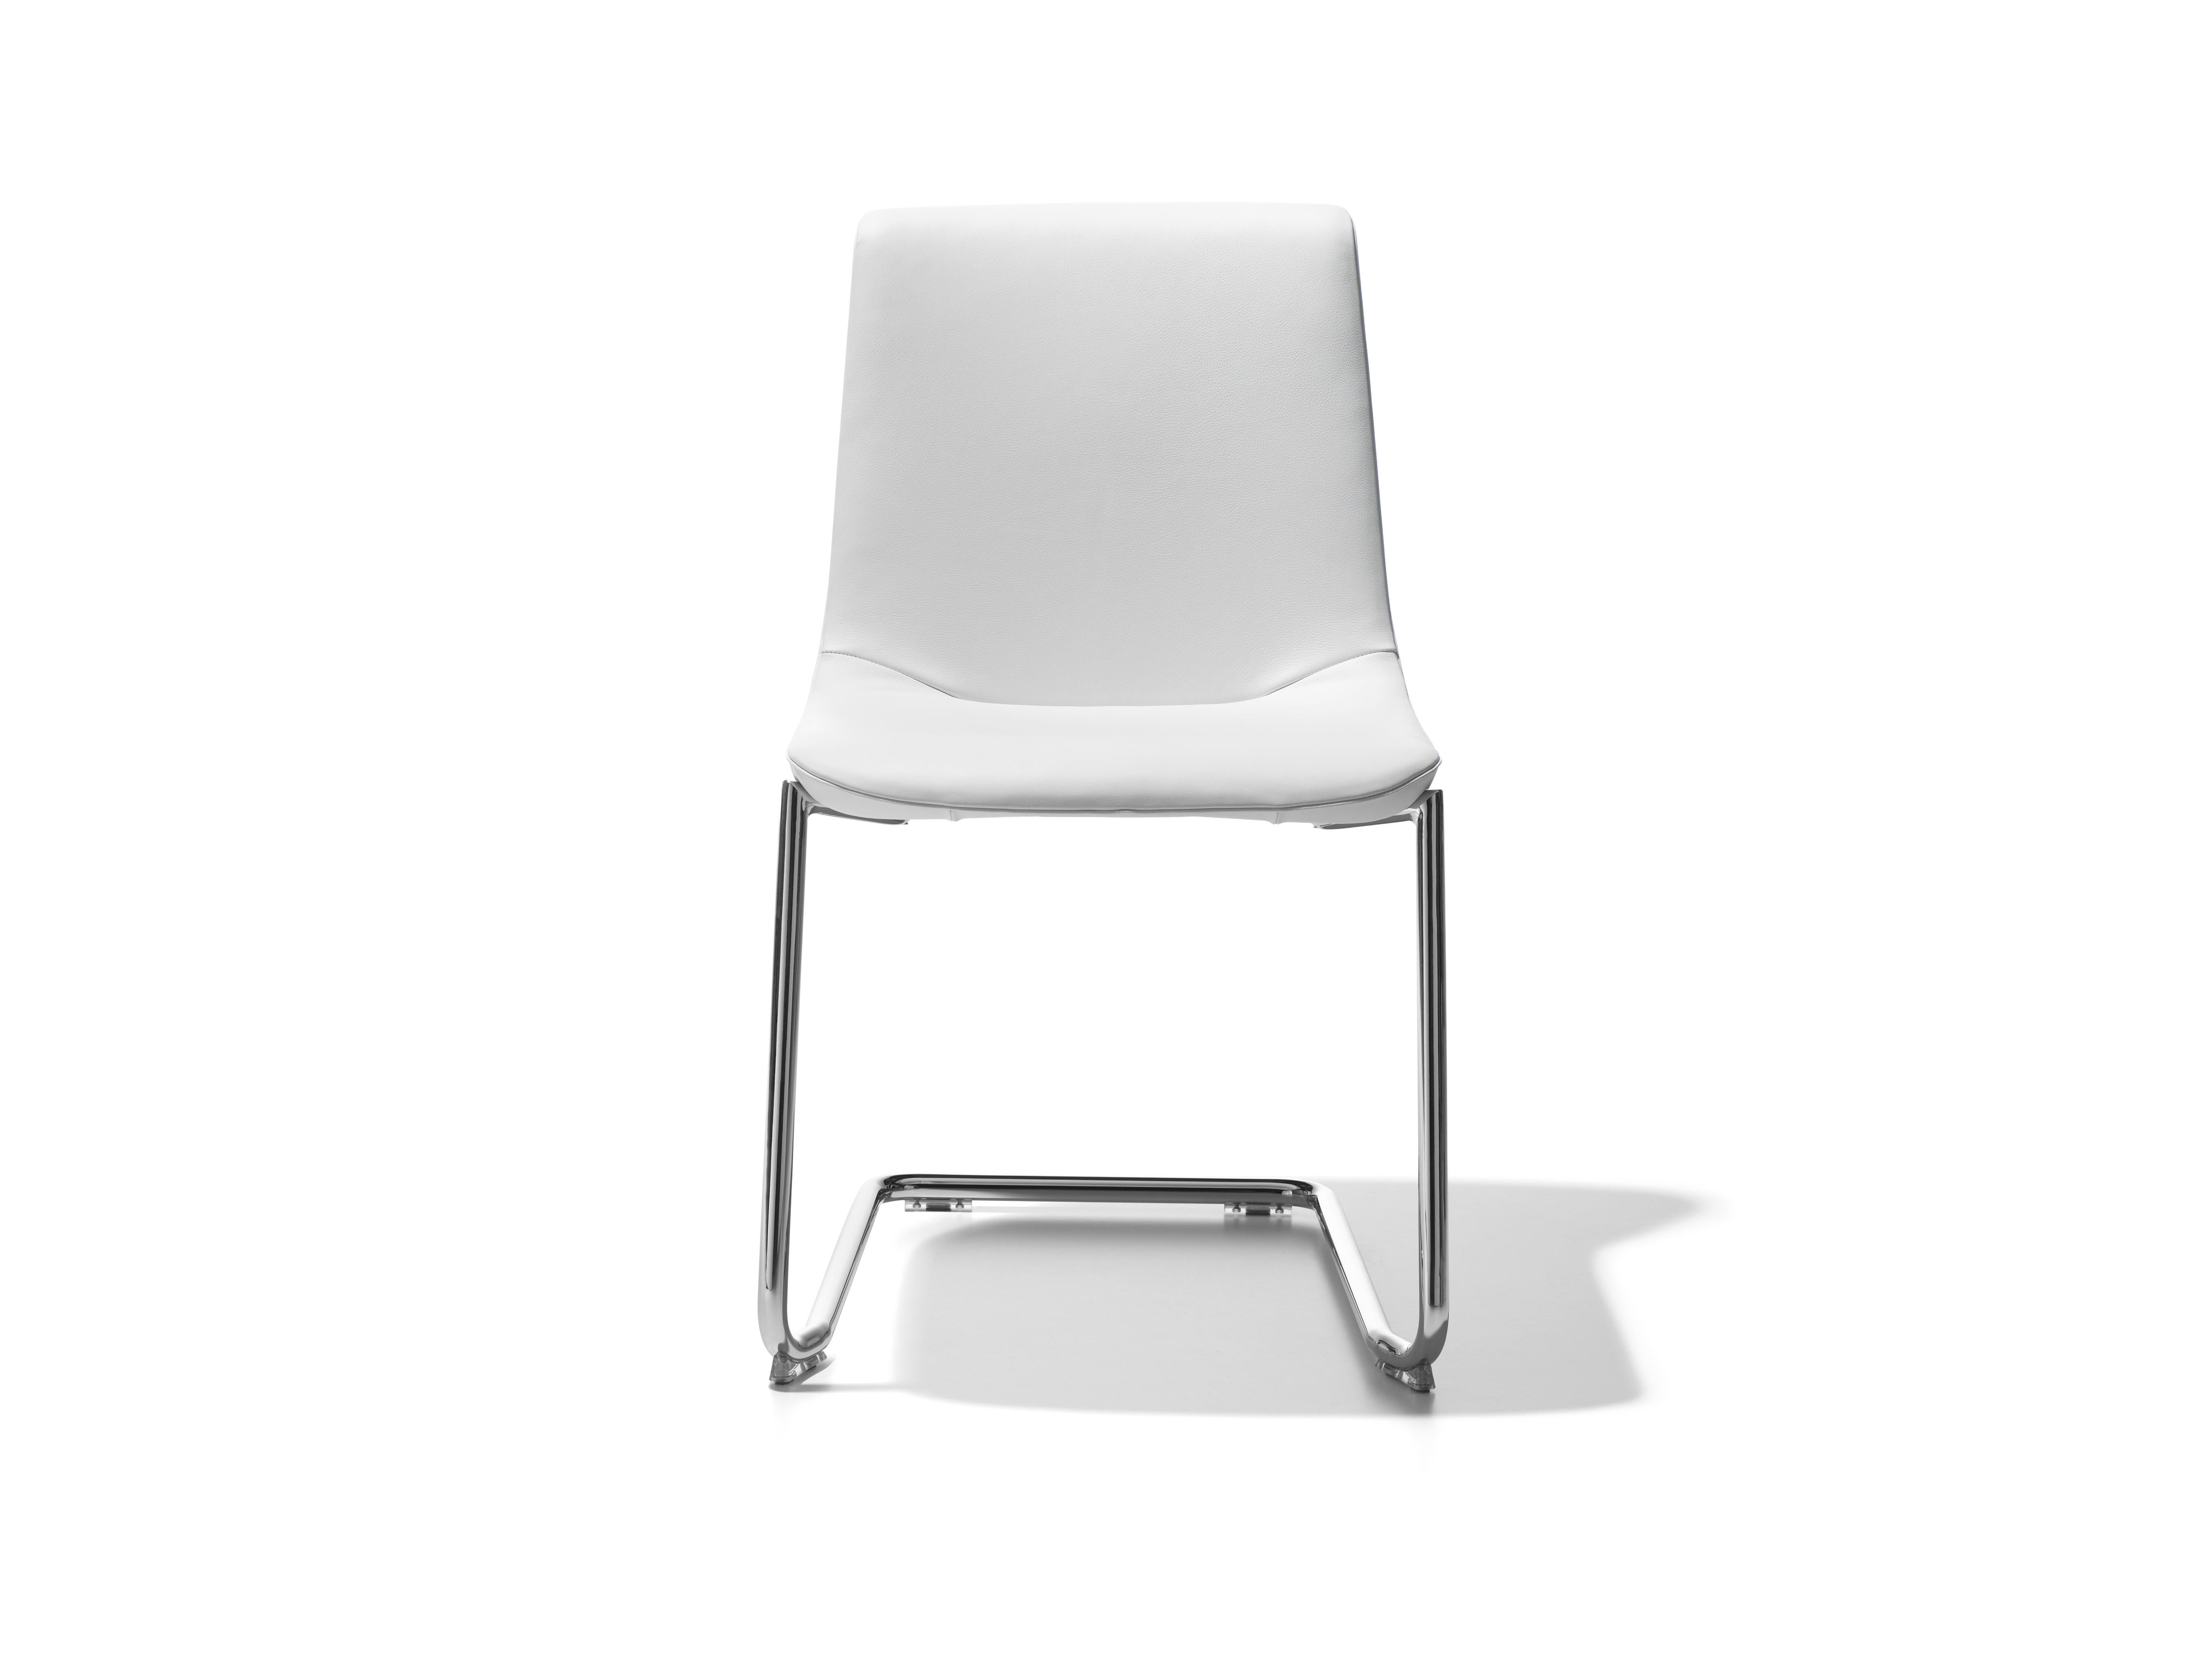 DS-718 chair by De Sede
Dimensions: D 60 x W 49 x H 84 cm
Materials: chrome-plated, polyurethane shell with moulded foam seat, leather. 

Prices may change according to the chosen materials and size.

A matchless union of clear design,